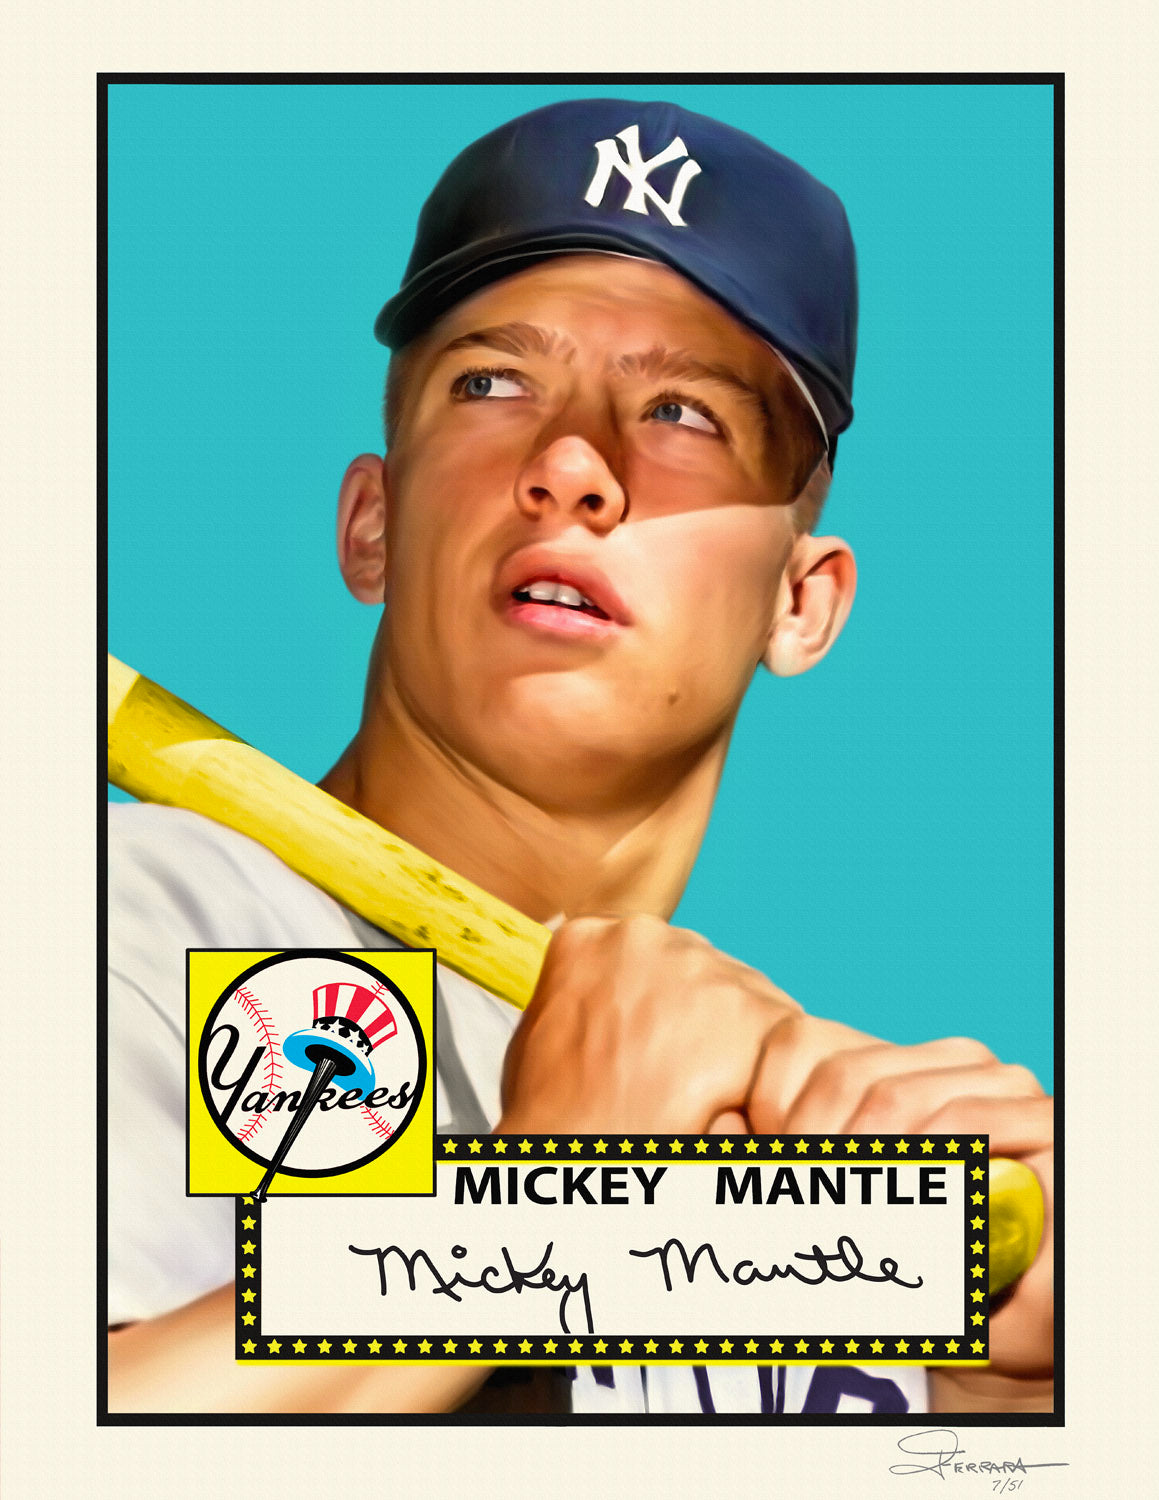 Mickey Mantle Rookie Card – ChampionshipArt - The Art of Champions